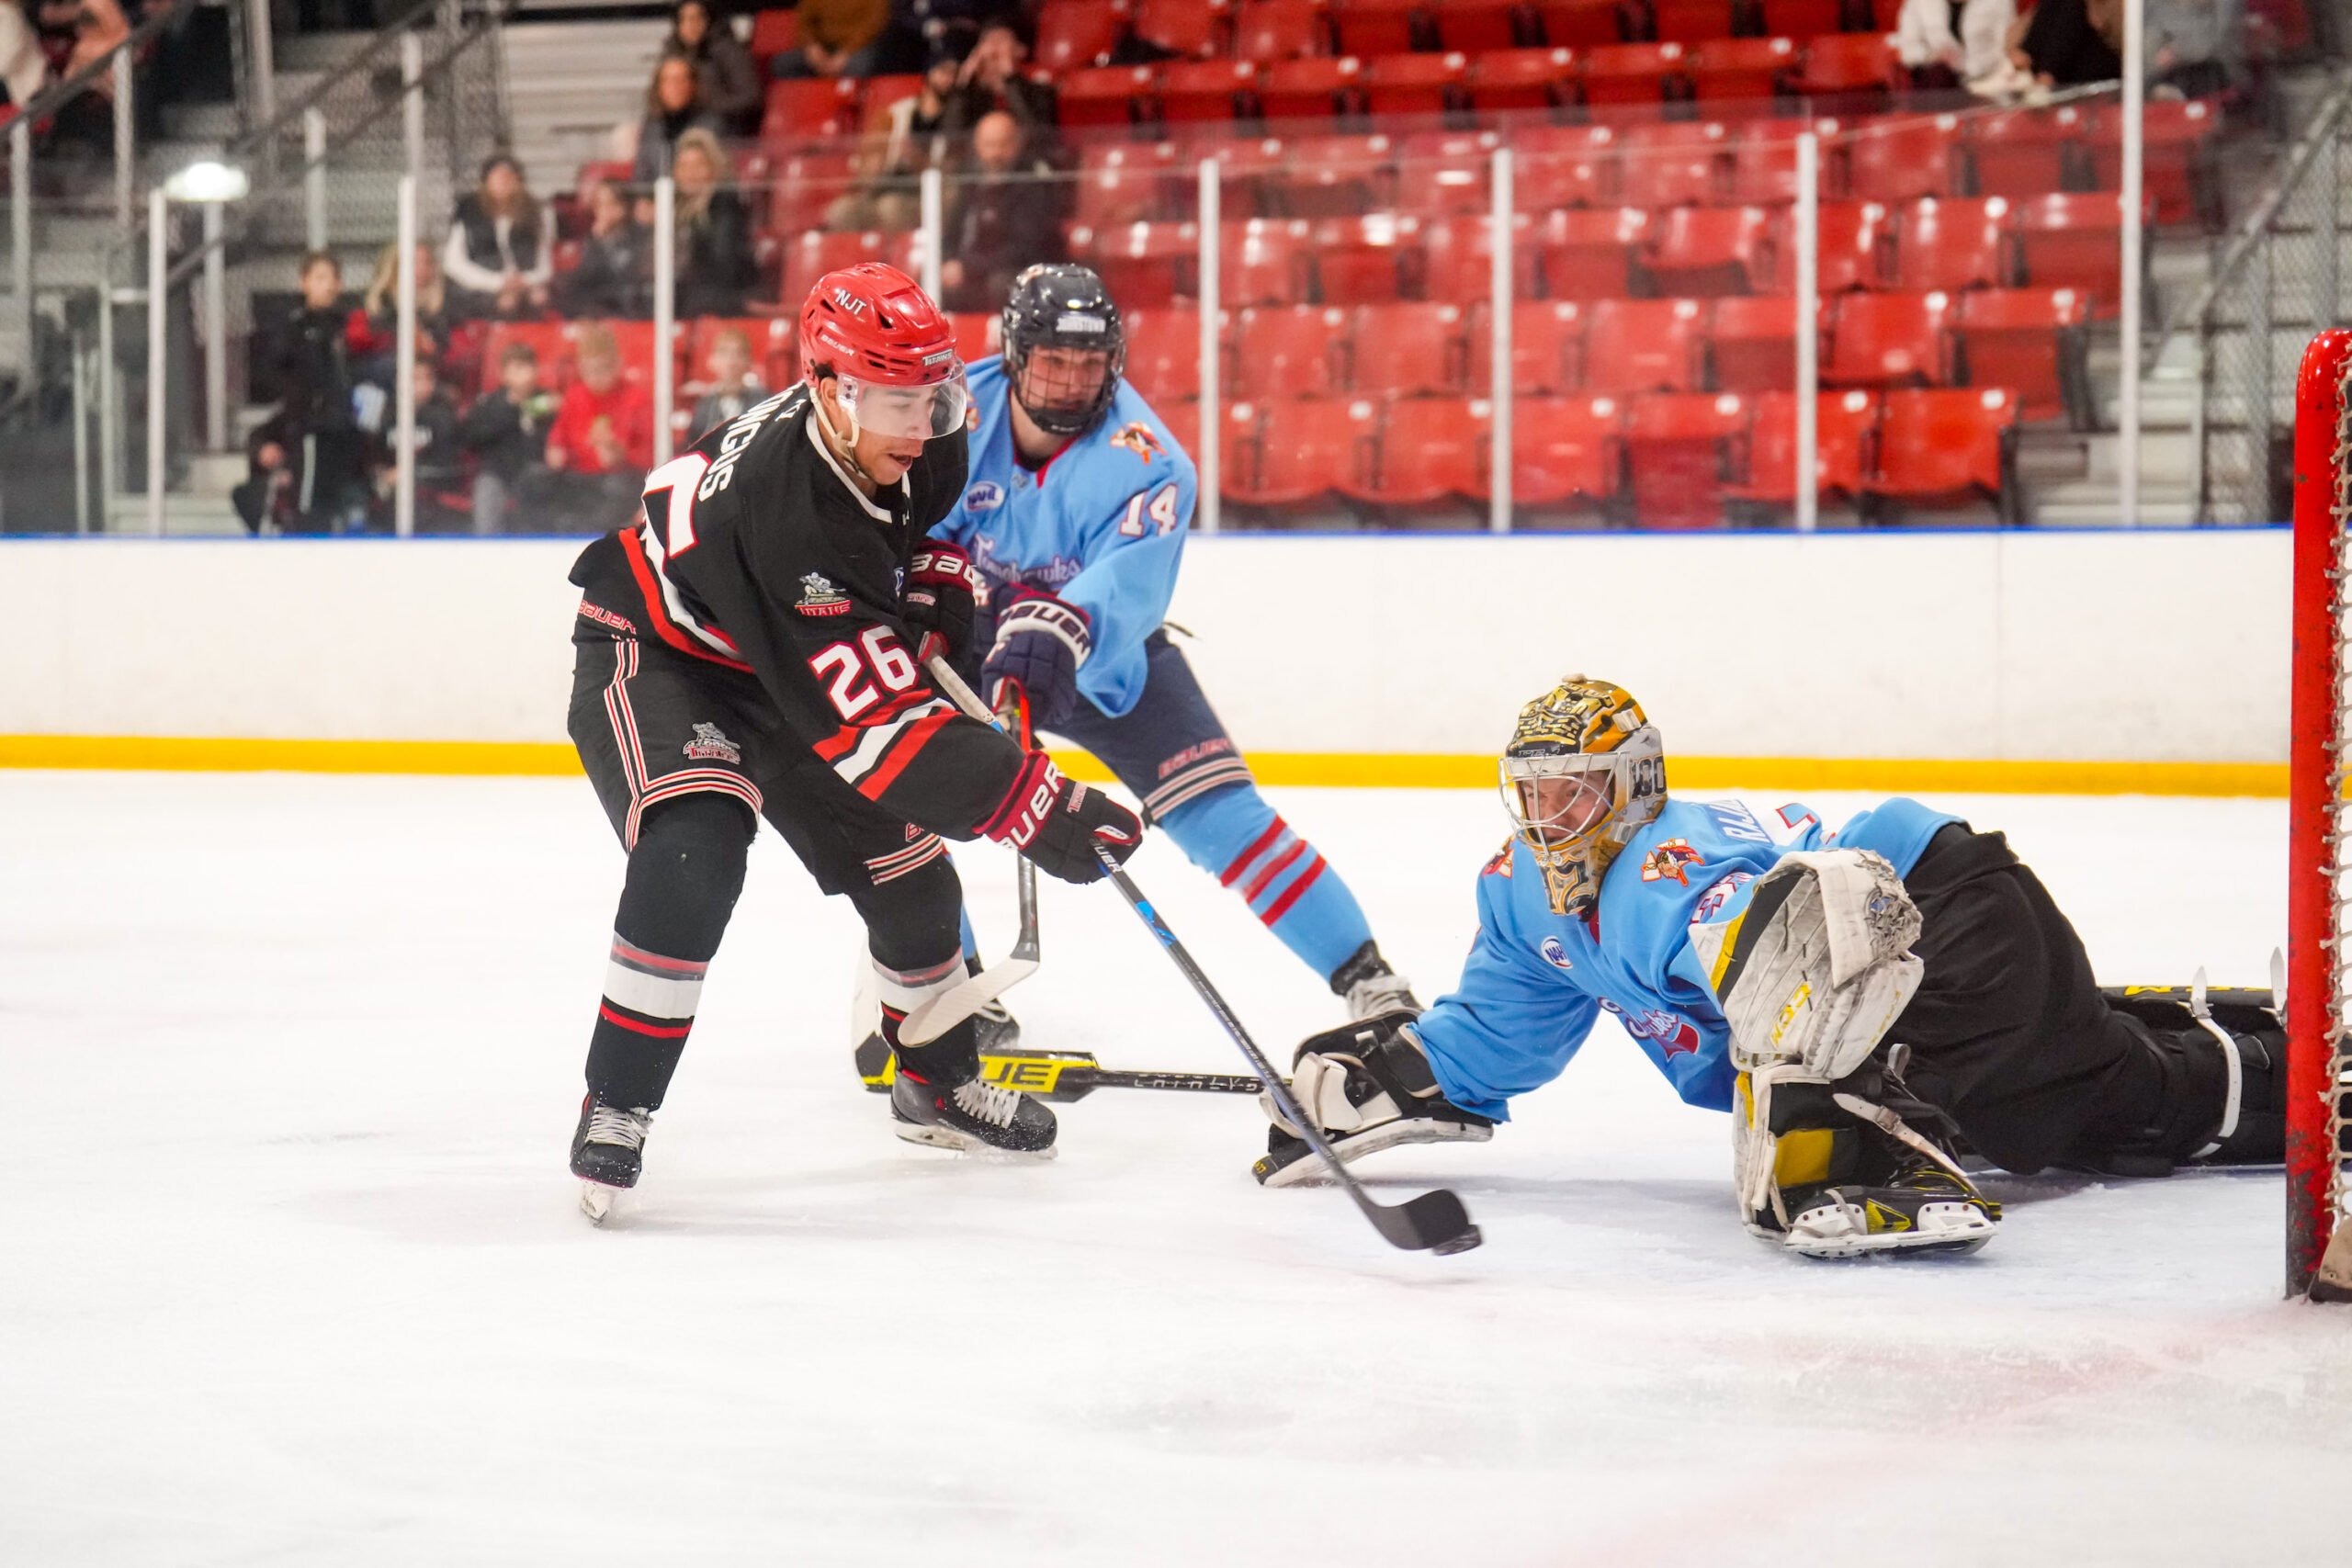 Balanced attack leads Titans to 4 – 2 win over Tomahawks to complete weekend sweep